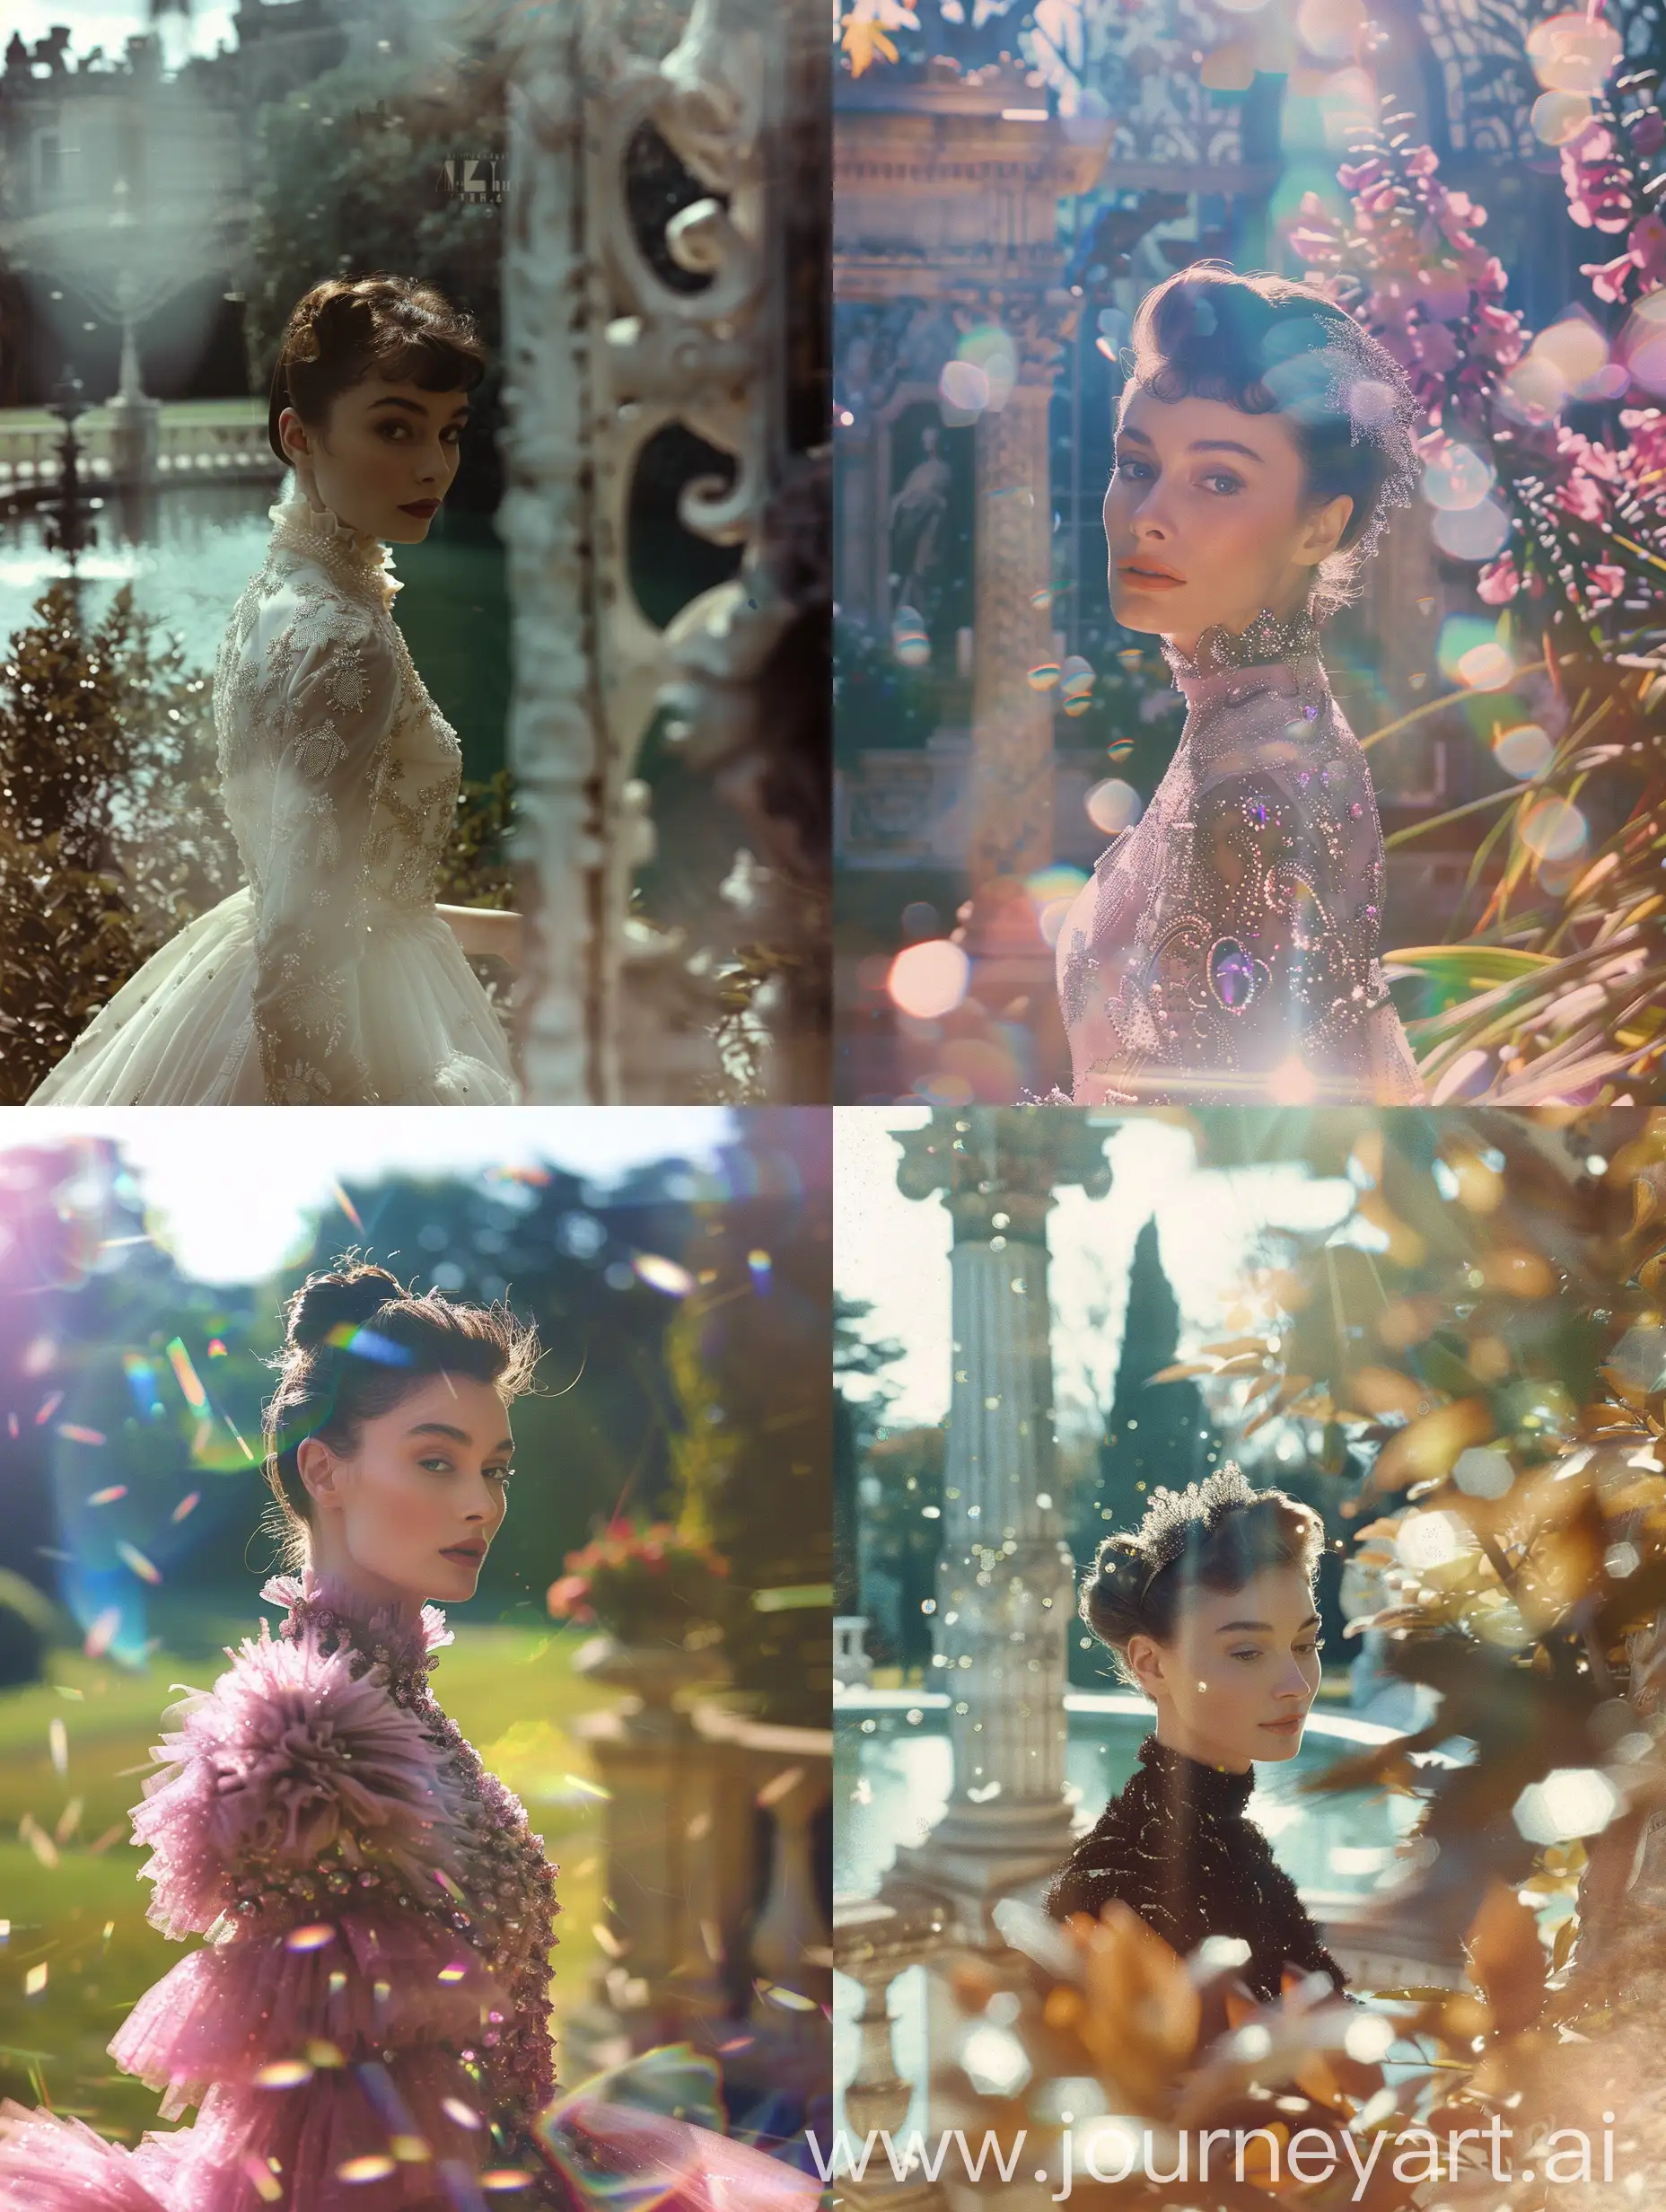 - Audrey Hepburn x Prada
- Environment: Palace
- Background: Garden Palace
- Style: Rich
- Photography Type: Y2K - Dynamic Movement
- Theme: Soft Rich and Jewerly
- Visual Filters: Fashion Film Look-Up Table (LUT)
- Camera Effects: Camera Blur, Camera Haze
- Resolution: High
